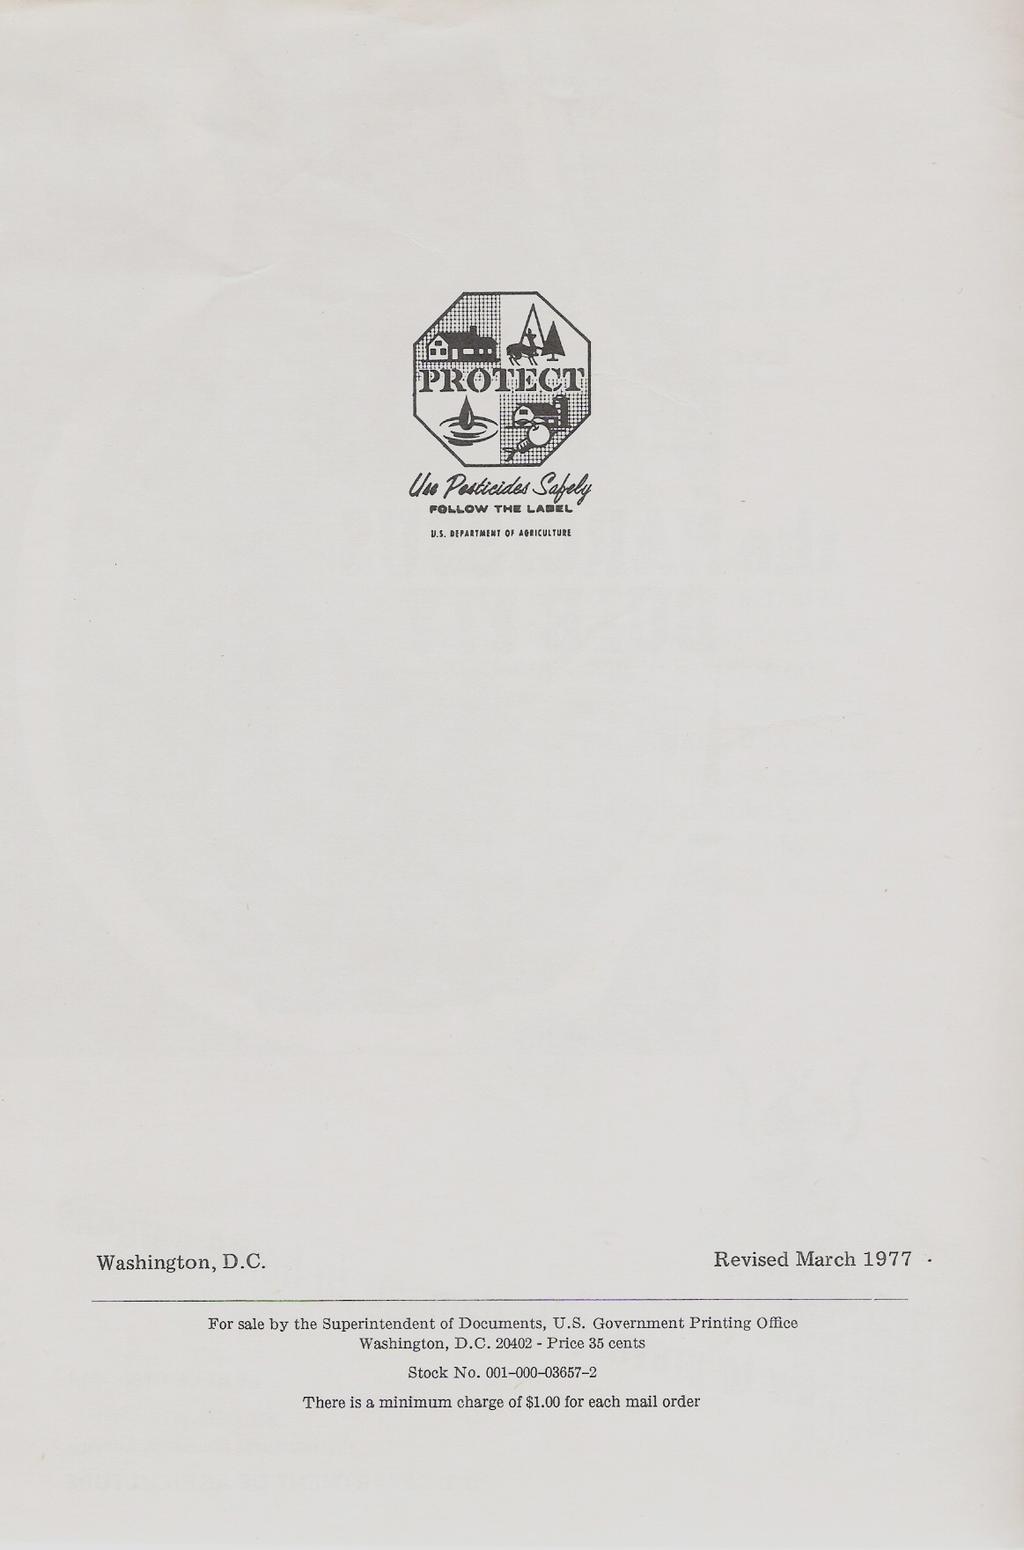 paiedeedif poi... Low Tilt LAMM U.S. DI AITAIIPIT OF MICULTURE Washington, D.C. Revised March 1977 For sale by the Superintendent of Documents, U.S. Government Printing Office Washington, D.